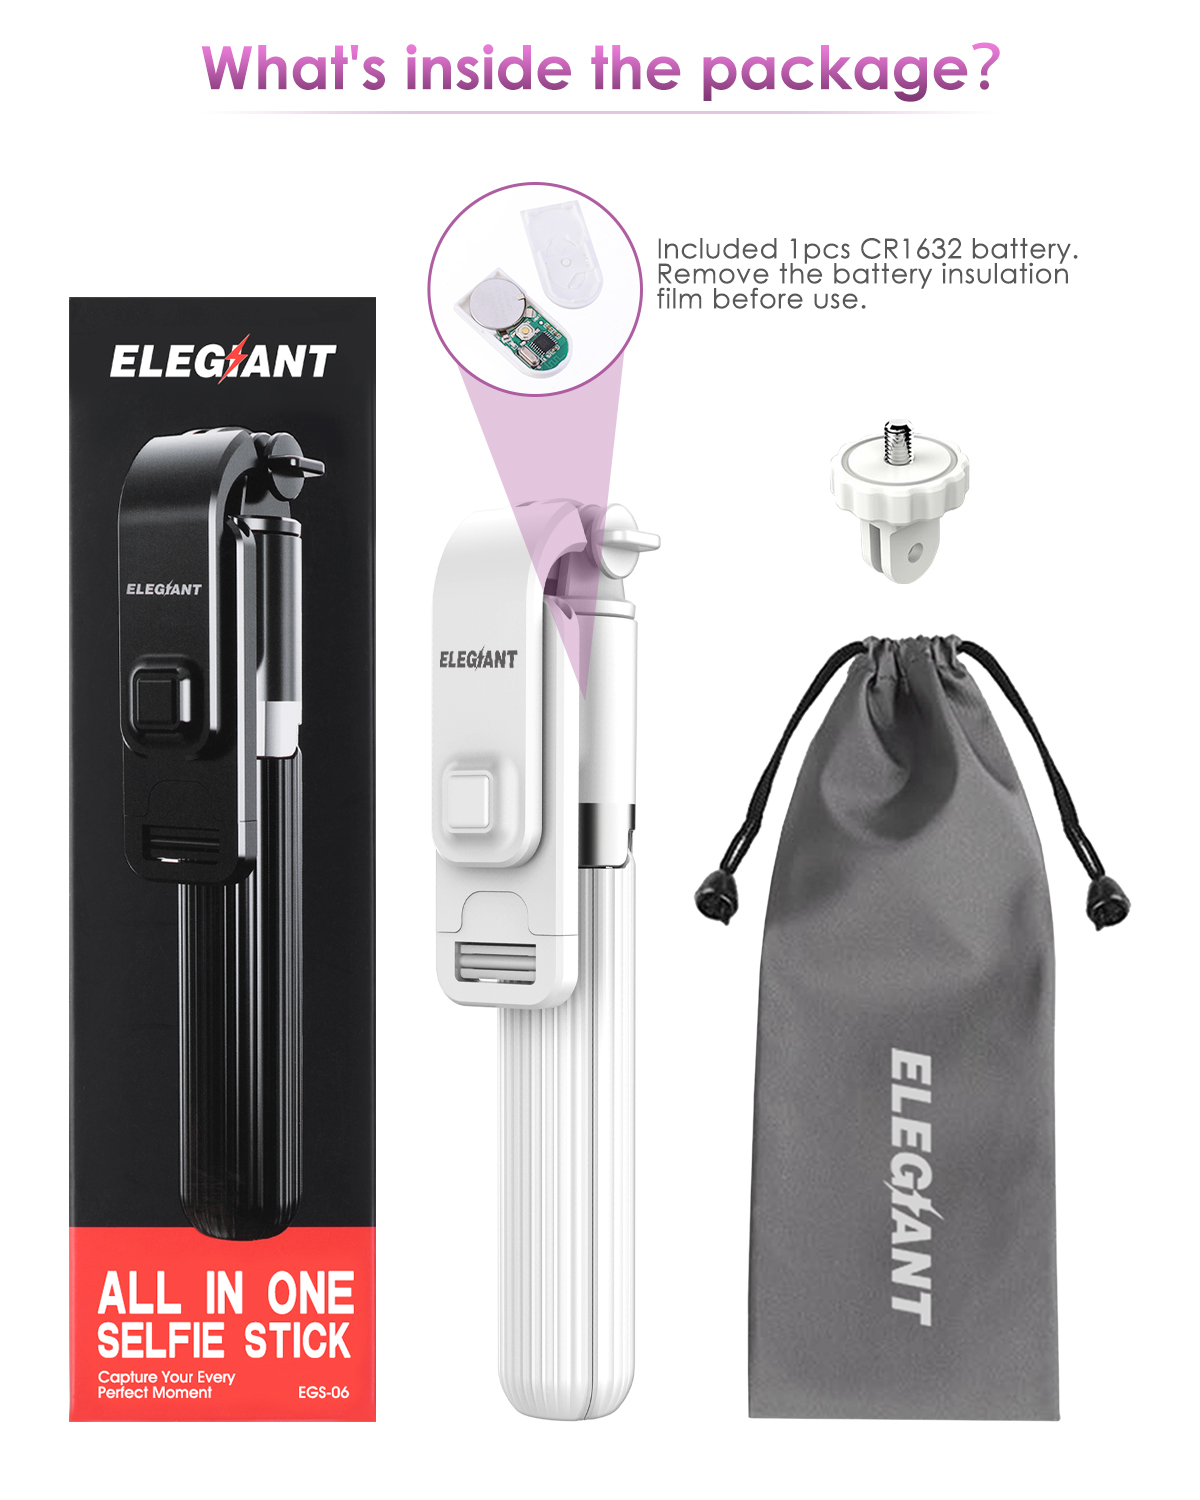 ELEGIANT Selfie Stick Lightweight Aluminum All in One Extendable bluetooth Tripod with Remote Control for iPhone Galaxy for Gopro Sport Camera DSLR Cam